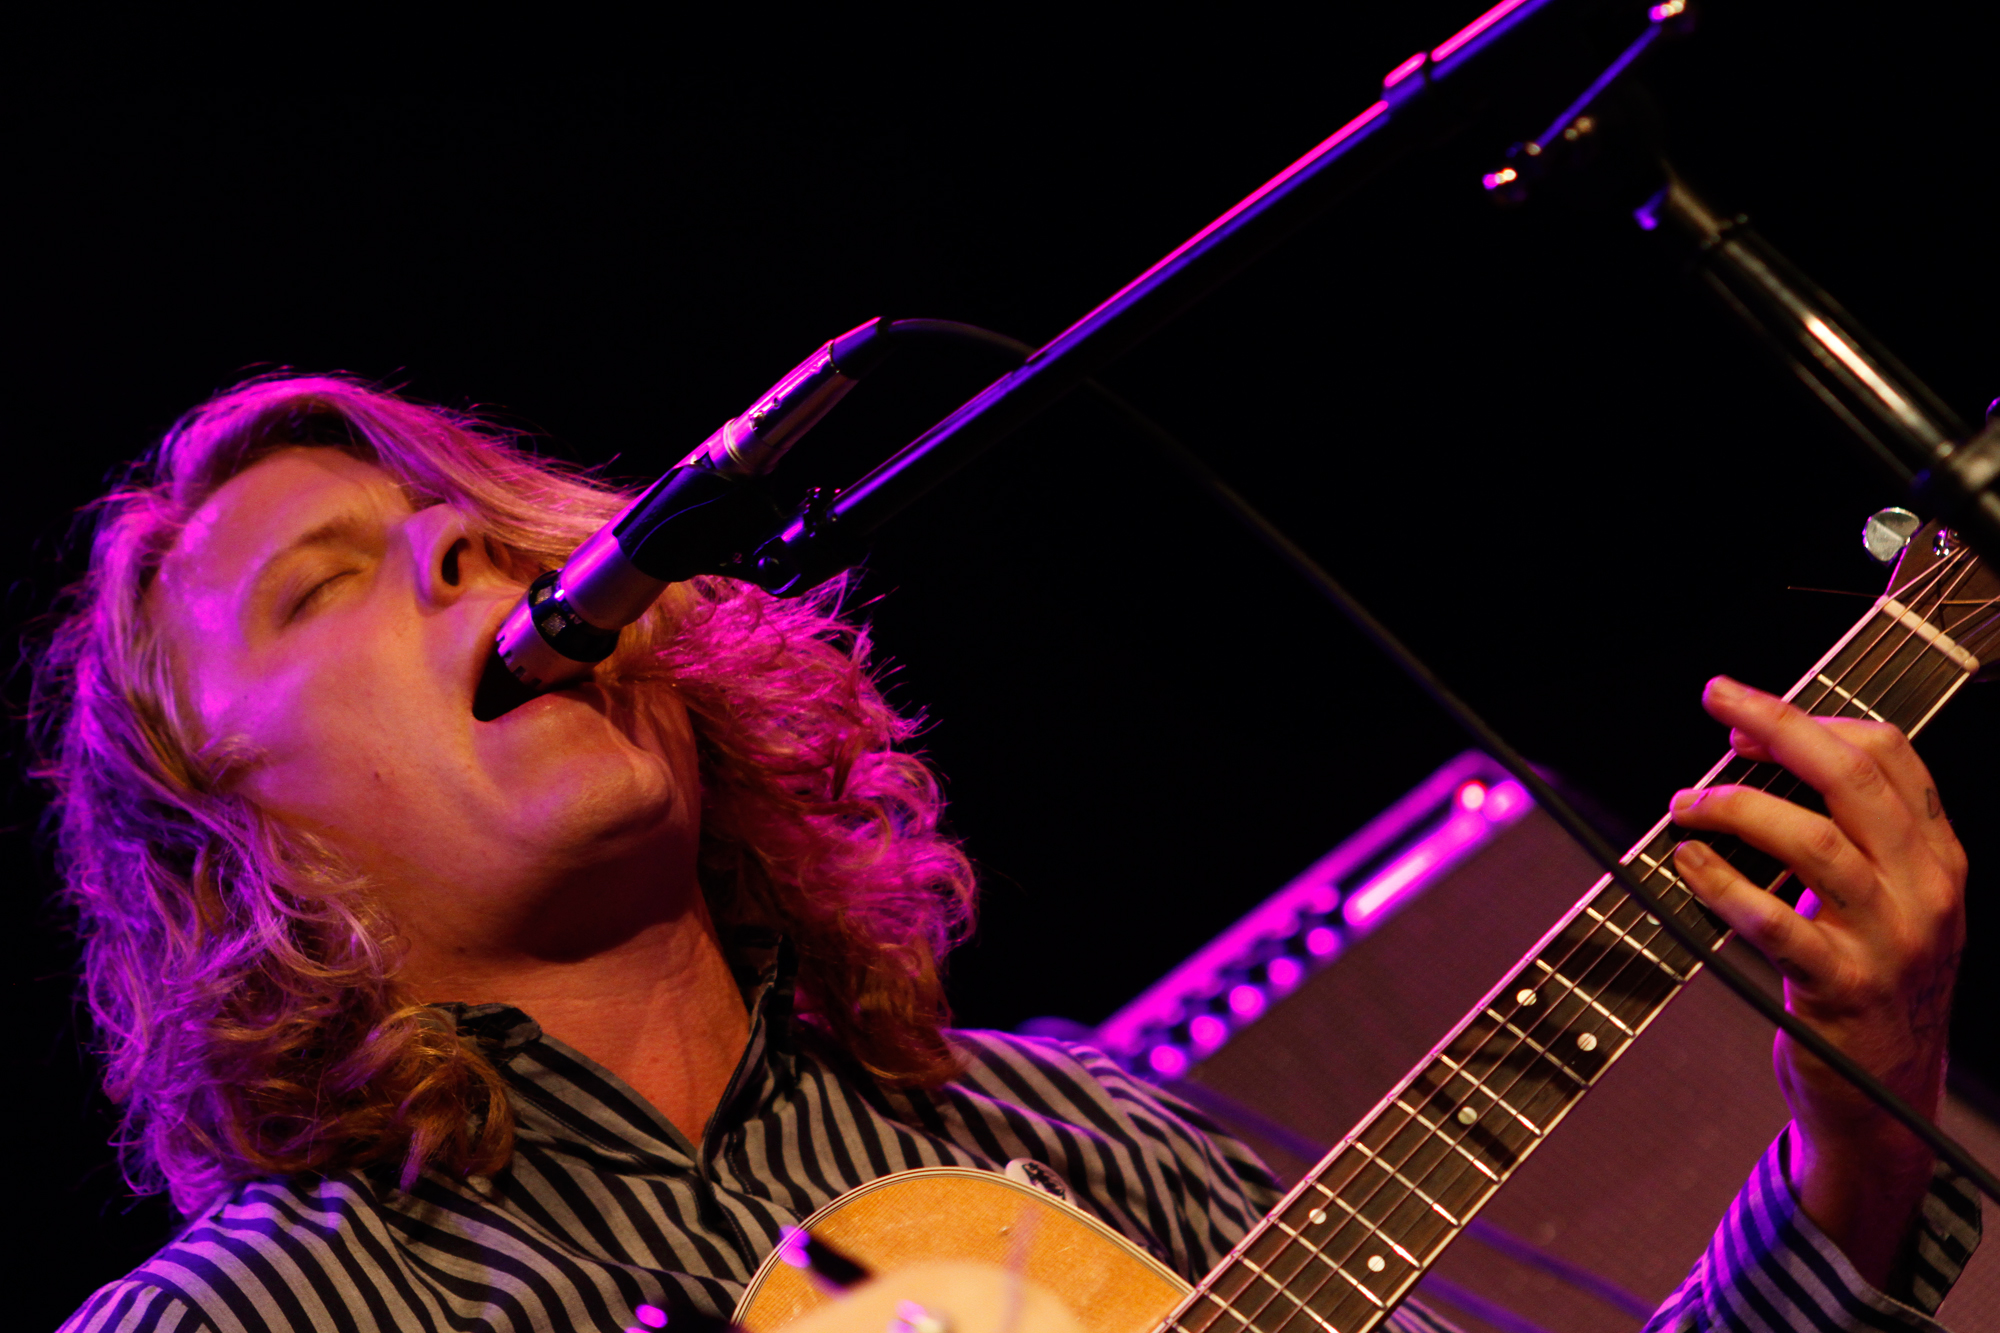 Ty Segall plays at Bowery Ballroom in New York, NY on Aug. 30, 2013.